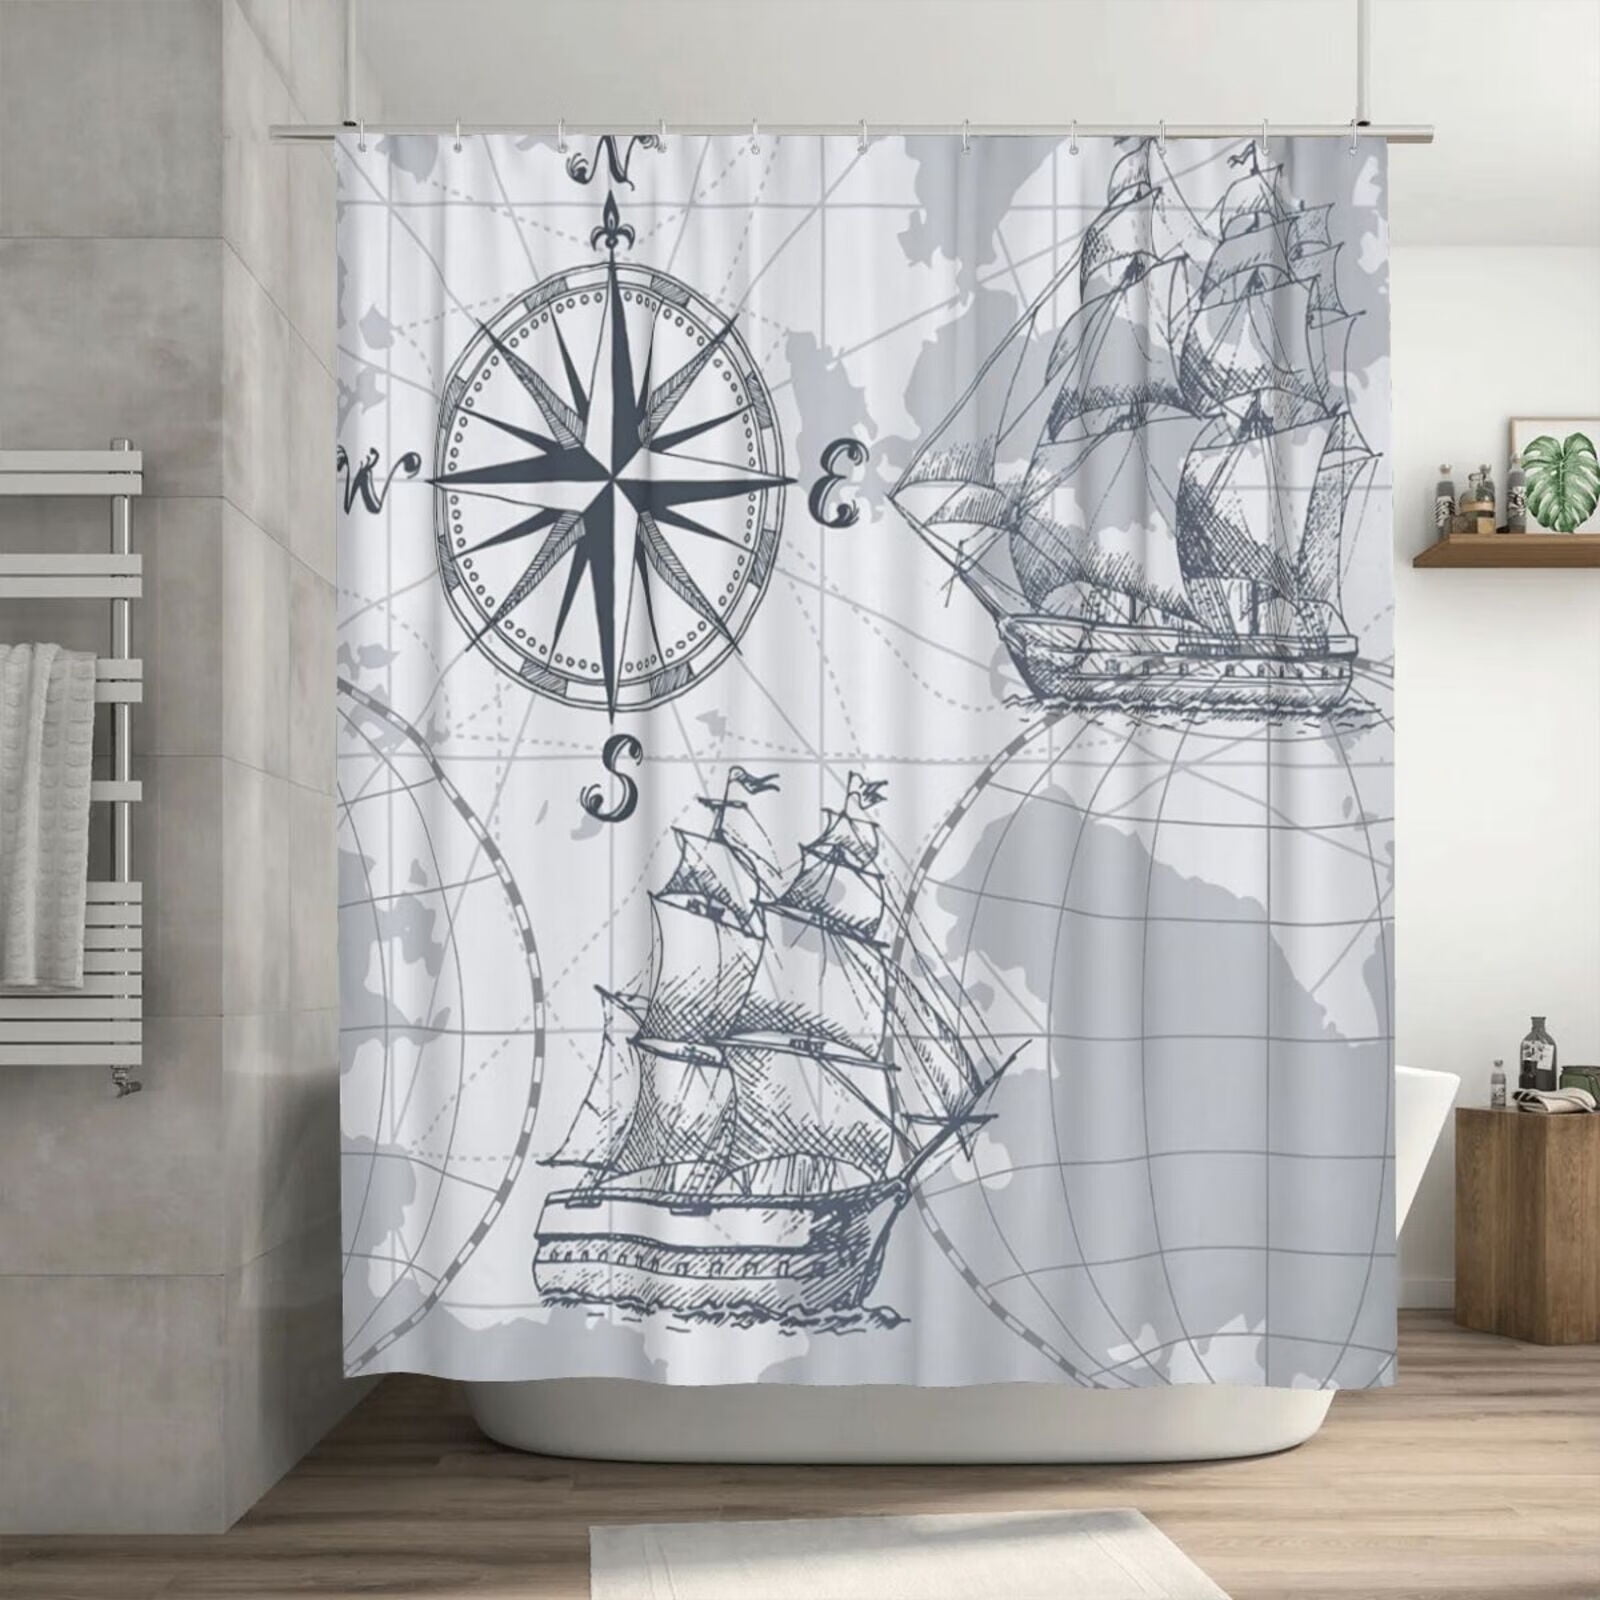 Nautical Sailboat Map Shower Curtain 72x72In for Bathroom Ship